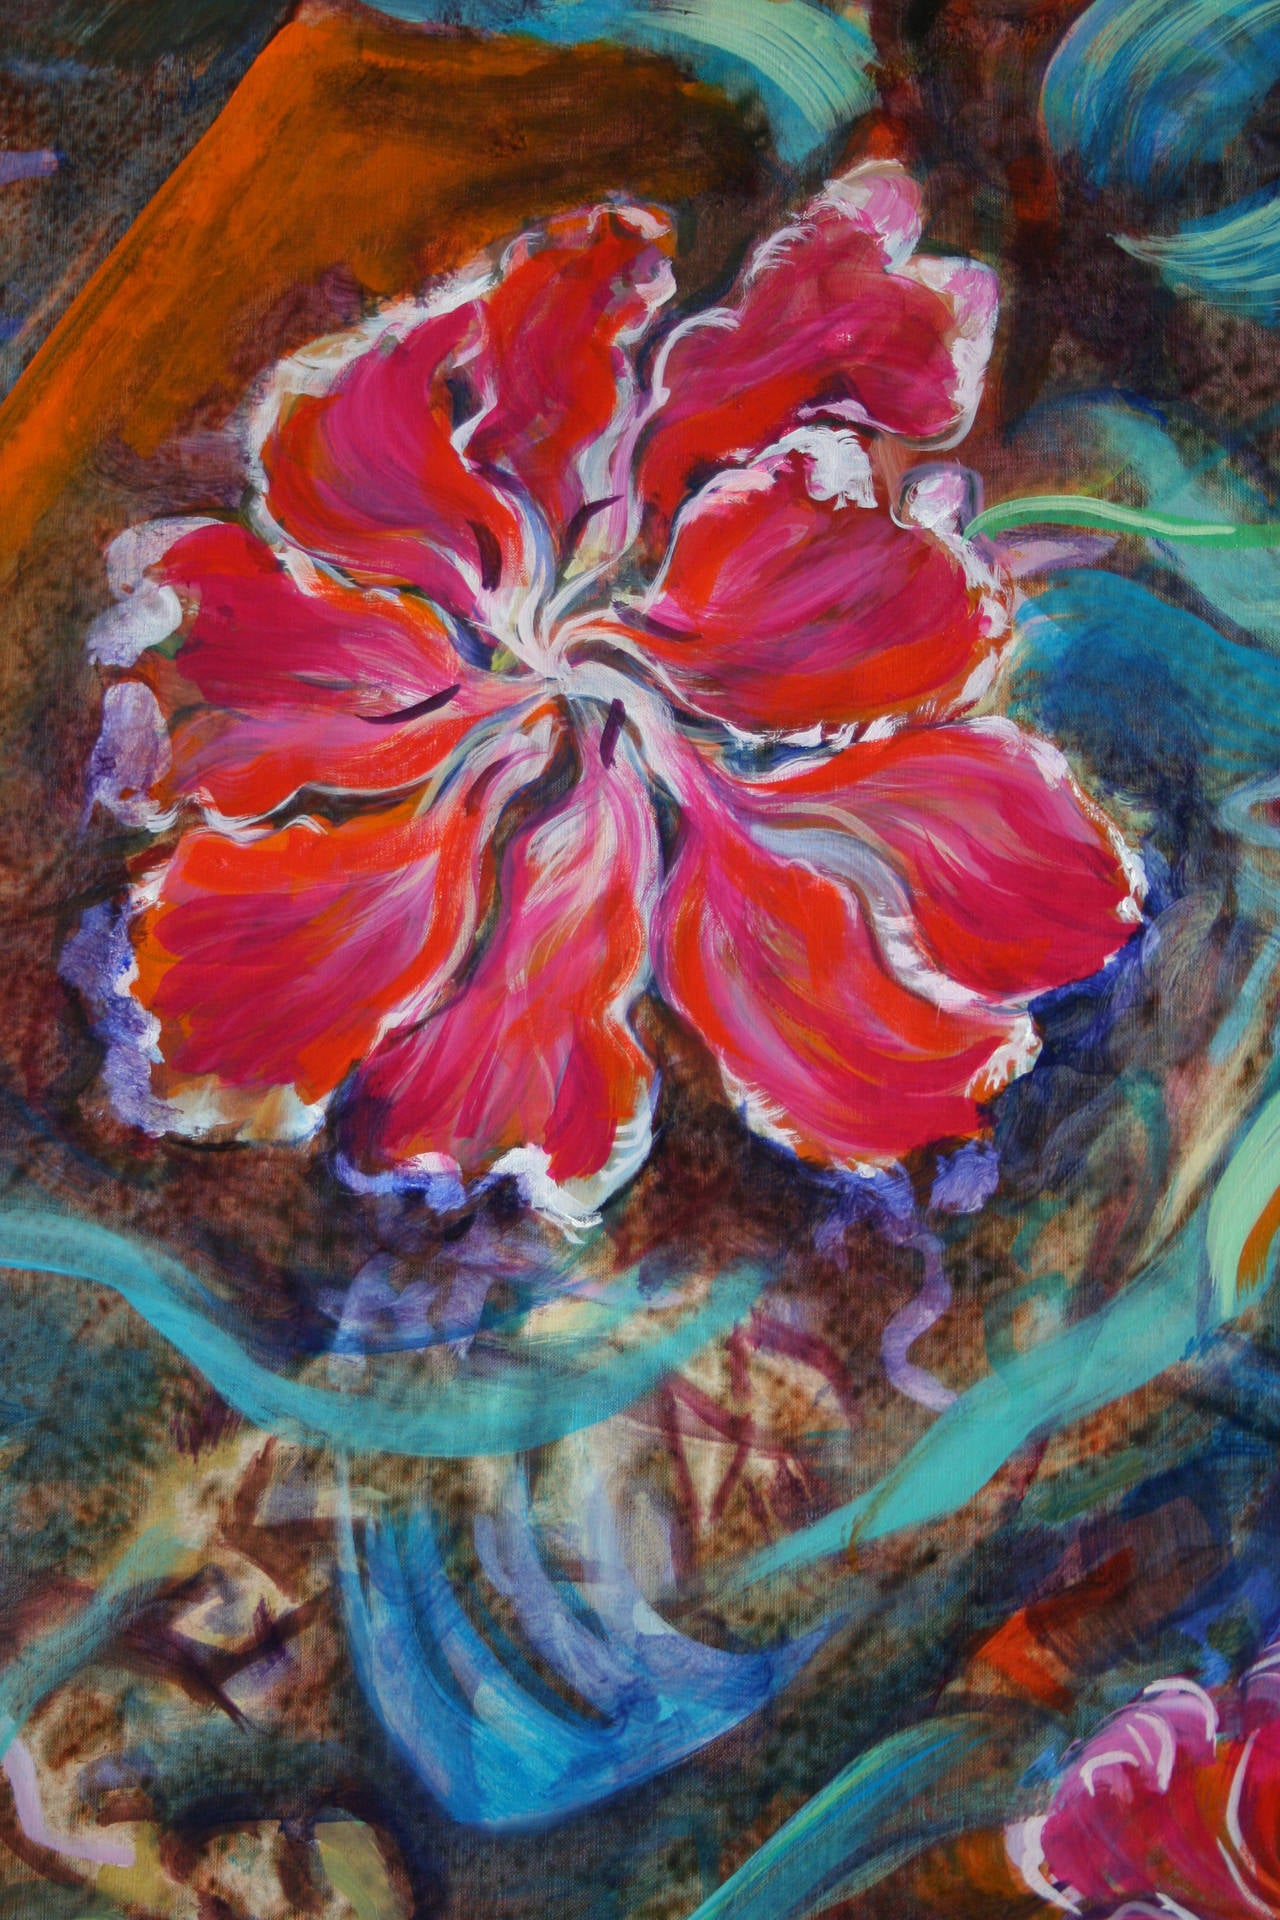 Carroussel is a painting made by Evelyne Ballestra, a French contemporary artist. This piece is a part of a flower series, defined by their distinct bright colors, satiny, silky, vibrating materials and form. The flower series is reminiscent of the